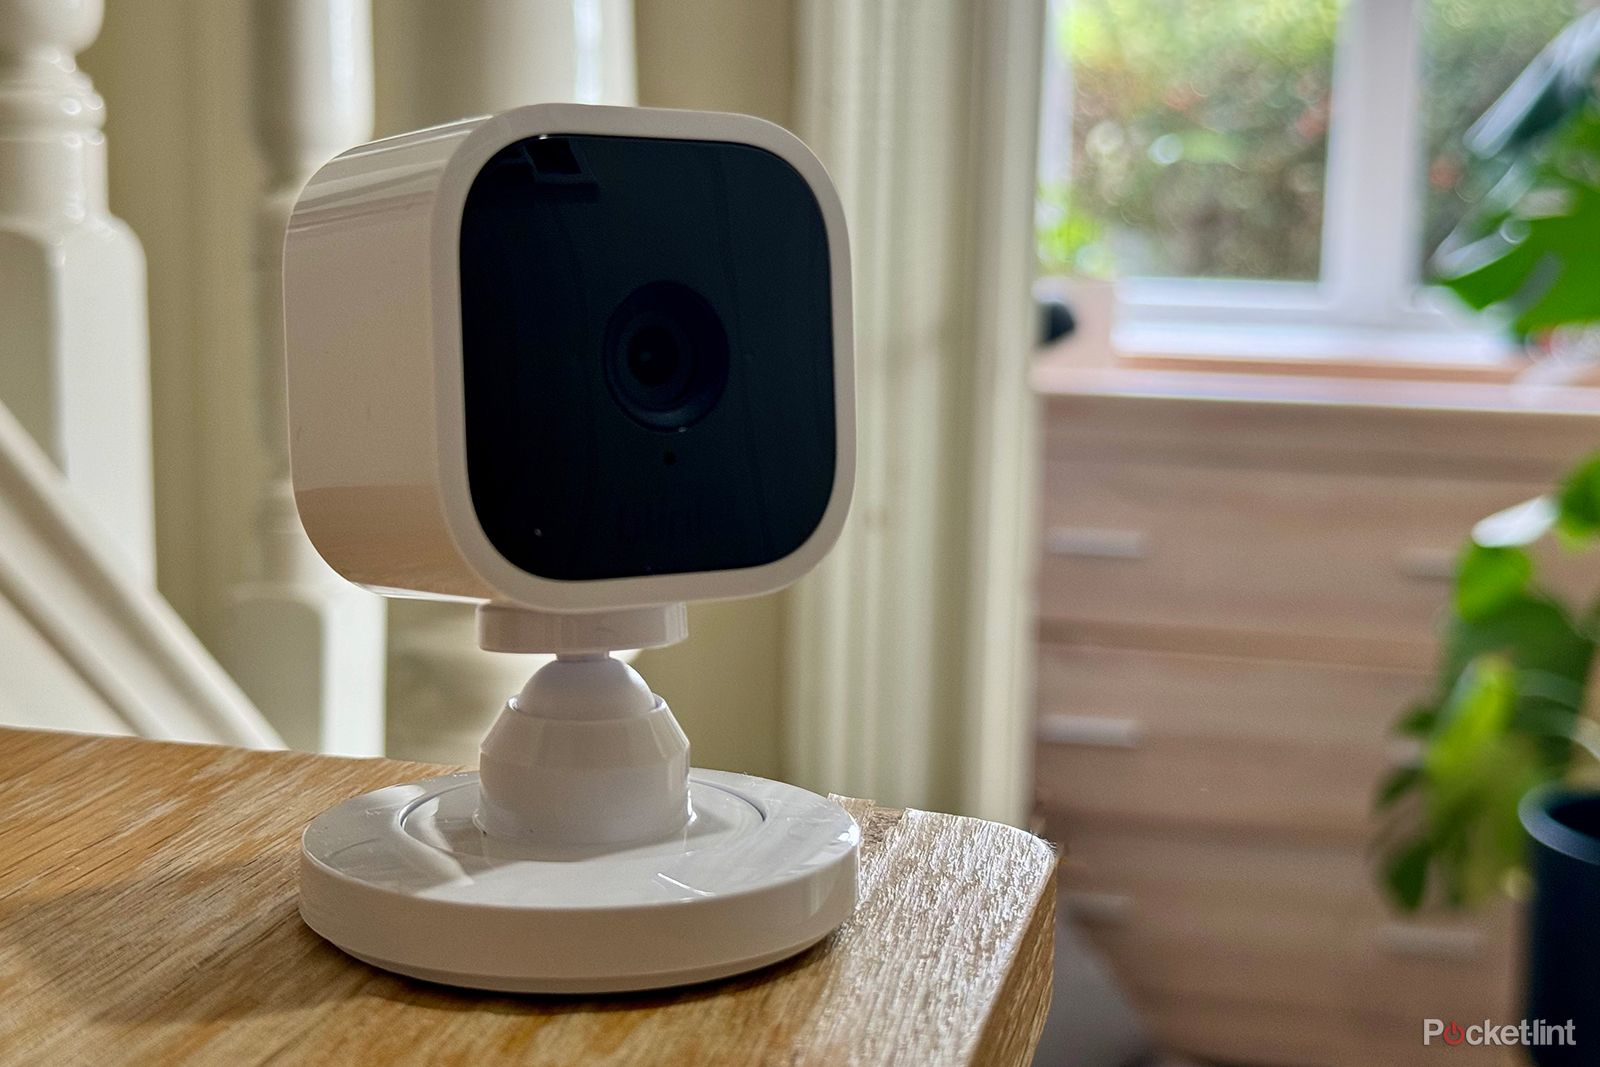 Blink and you’ll miss it: Mini security camera is just $20 for Prime Day